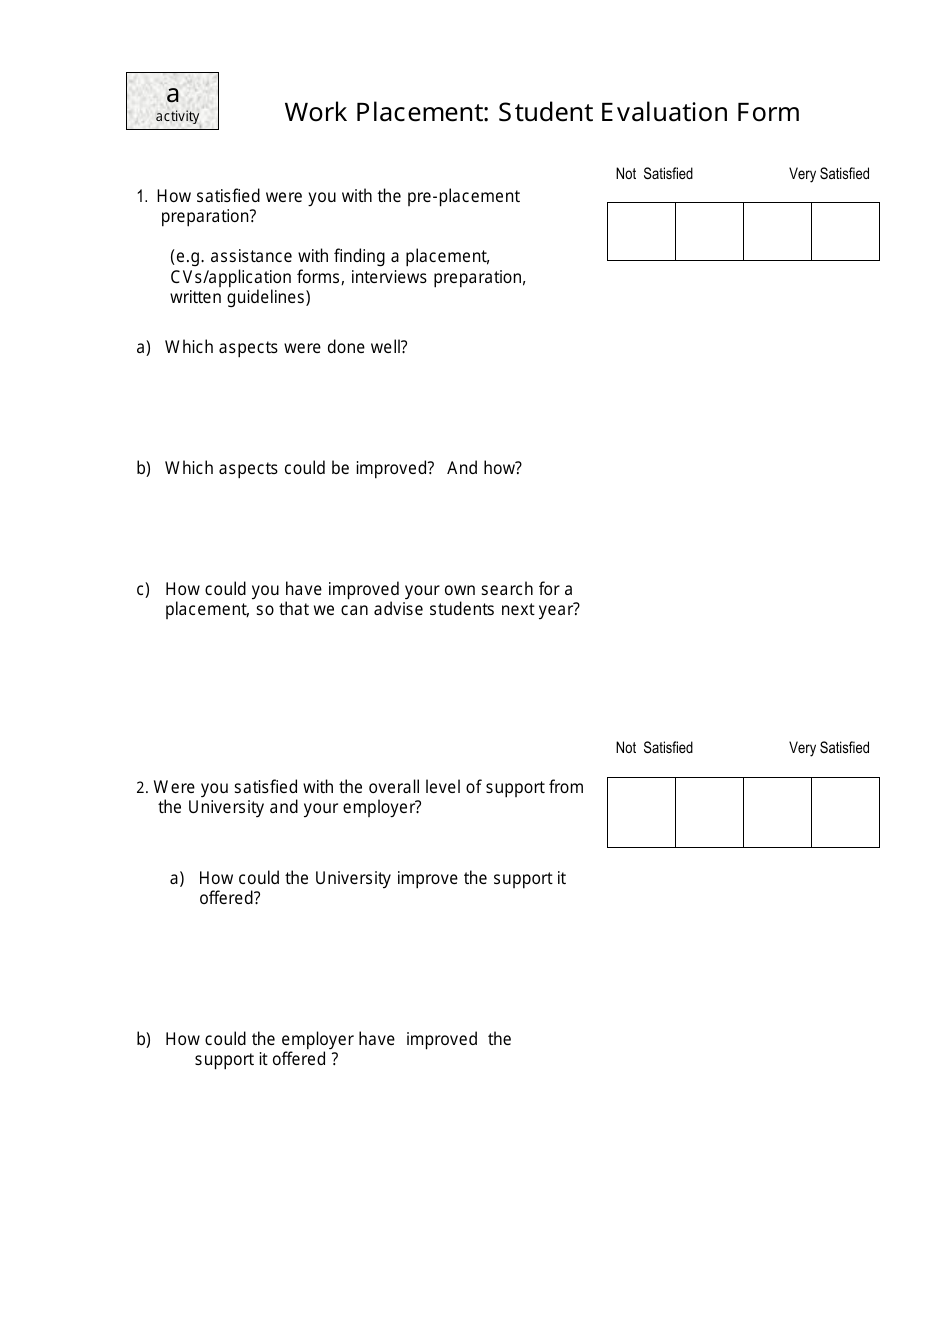 Student Evaluation Form - Five Questions, Page 1